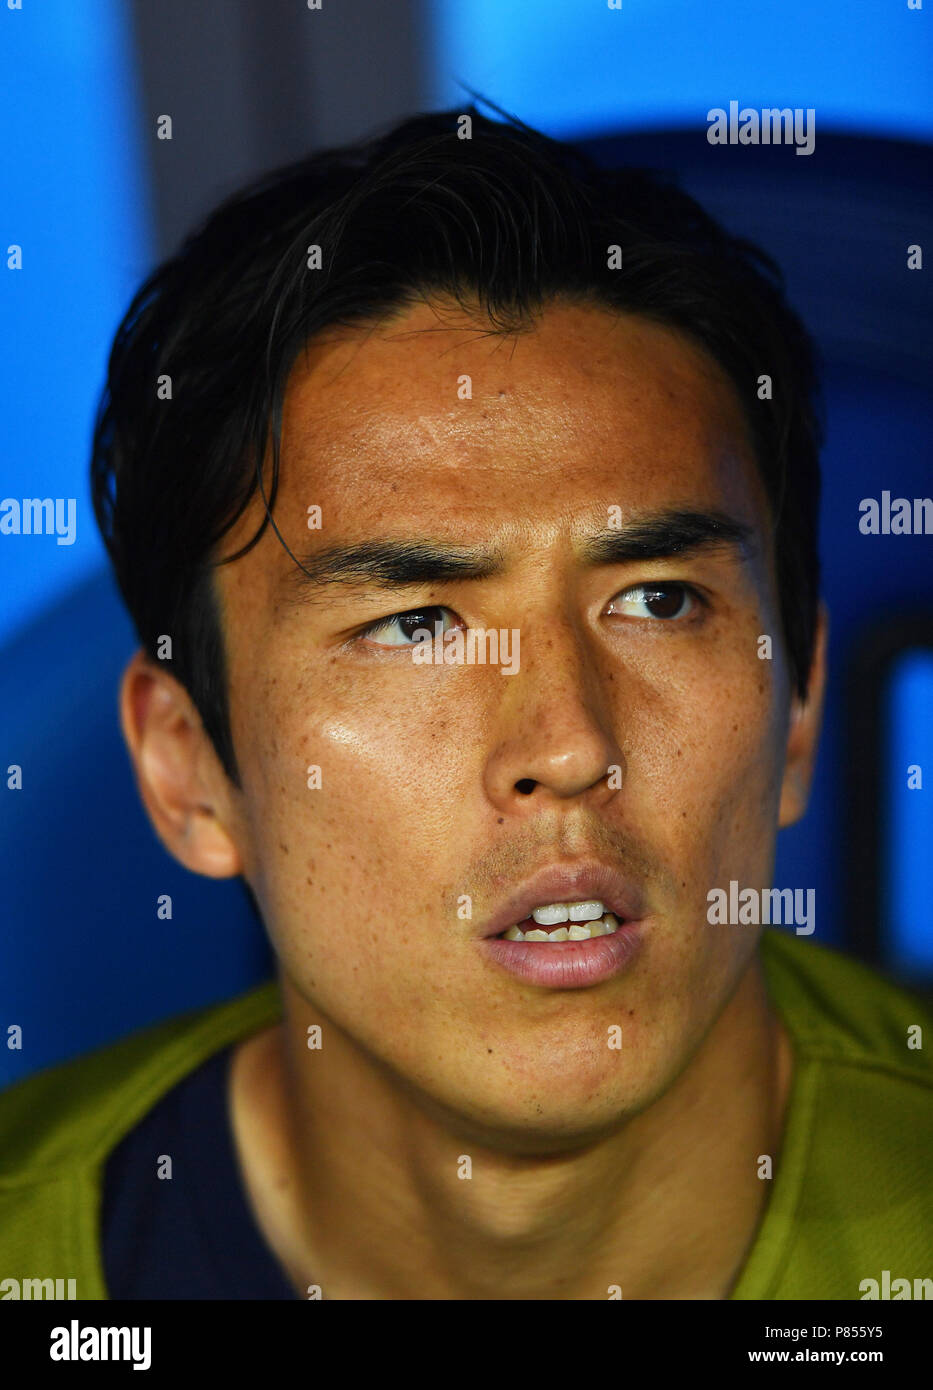 VOLGOGRAD, RUSSIA - JUNE 28: Makoto Hasebe of Japan during the 2018 FIFA World Cup Russia group H match between Japan and Poland at Volgograd Arena on June 28, 2018 in Volgograd, Russia. (Photo by Lukasz Laskowski/PressFocus/MB Media/) Stock Photo